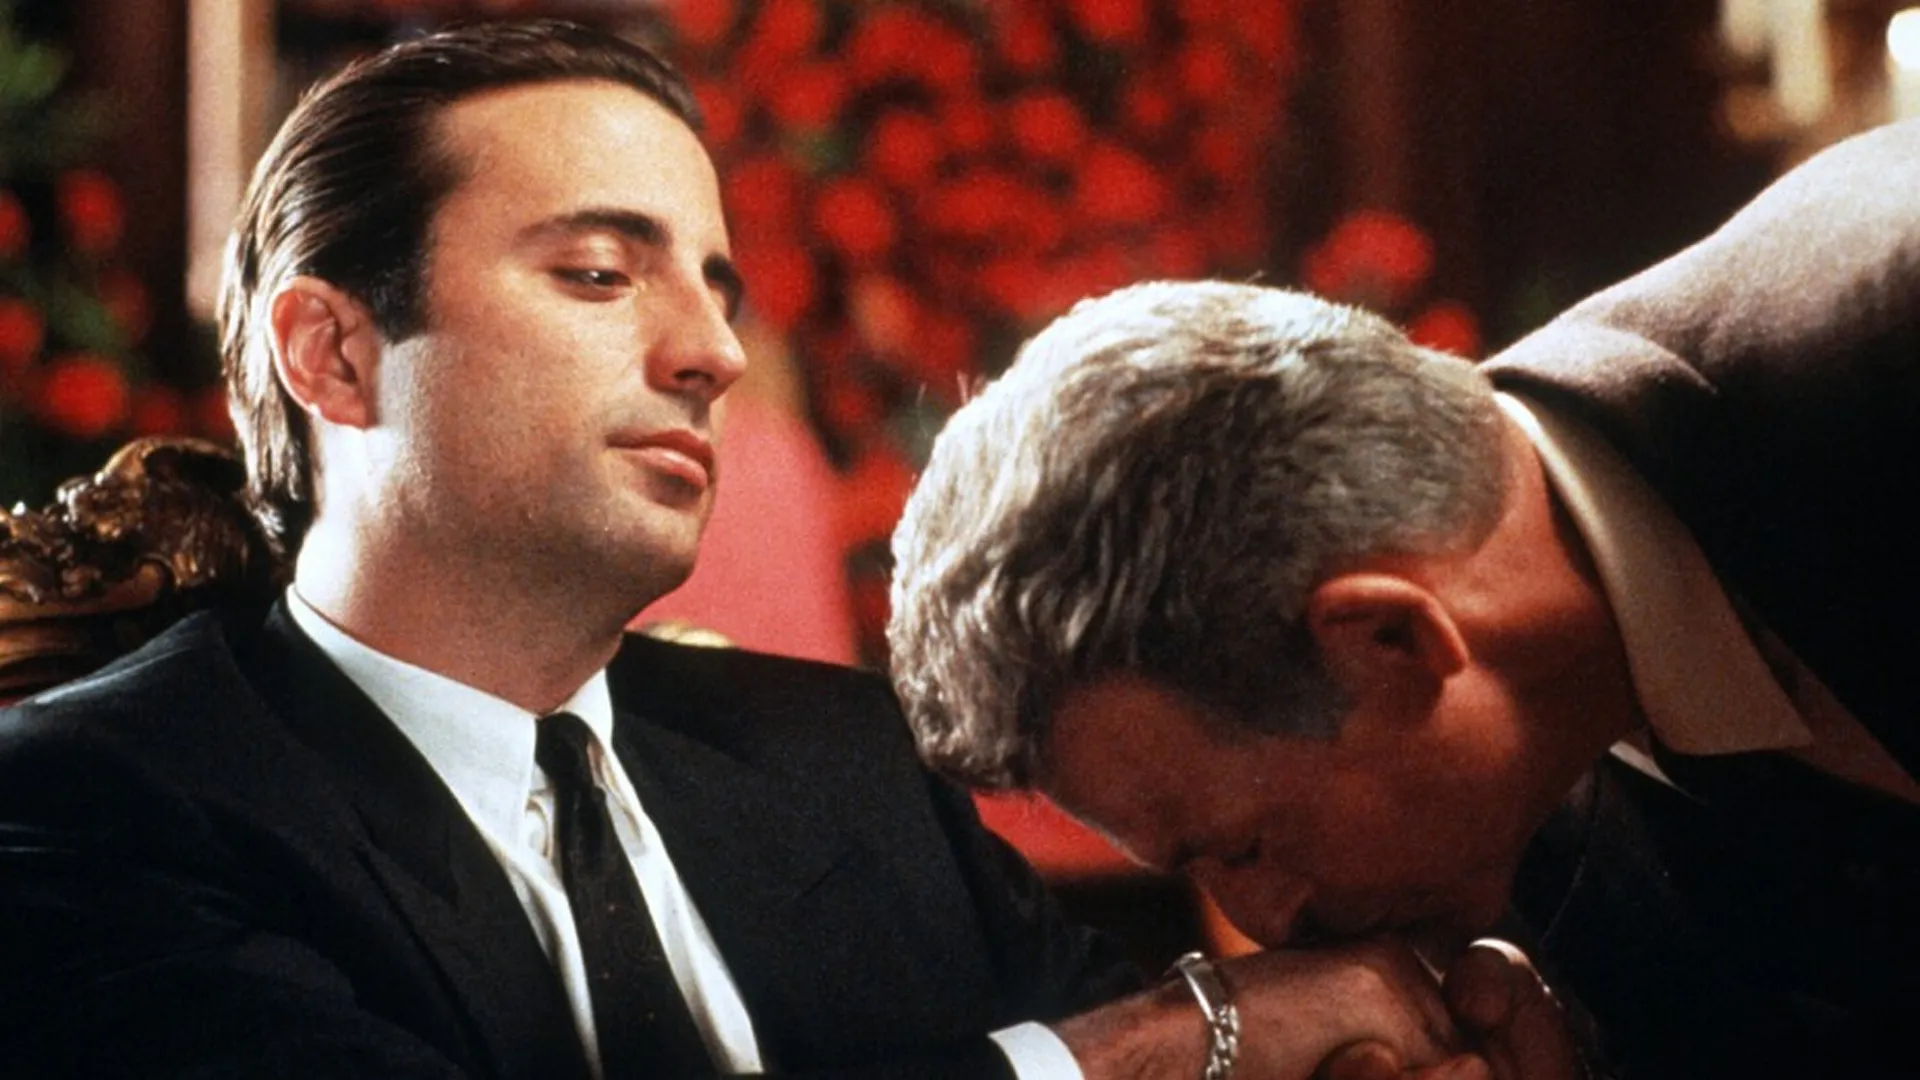 How Marlon Brando Fought for Al Pacino's Breakout Role in 'The Godfather'—A Behind-the-Scenes Look